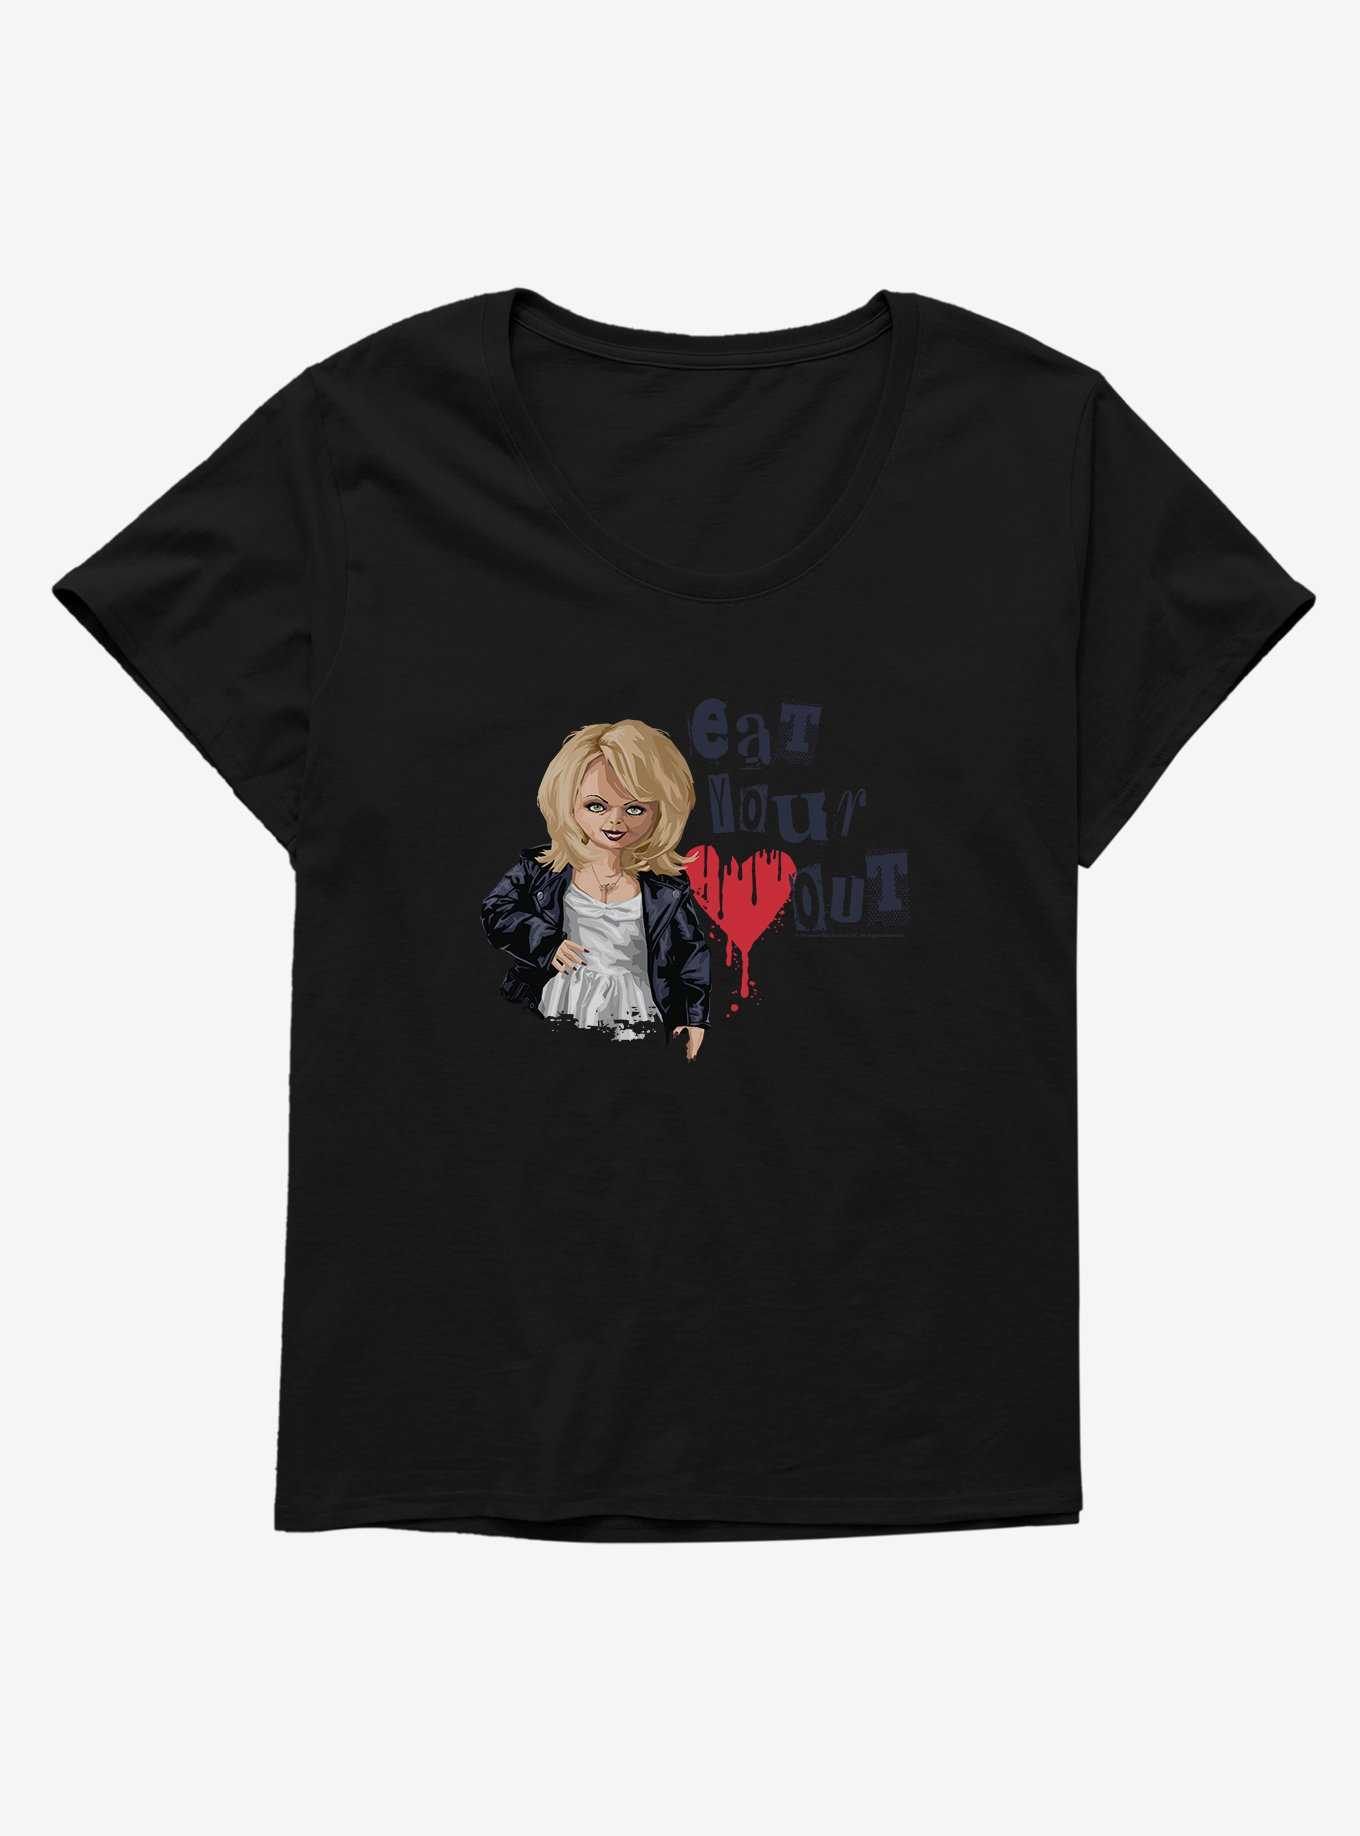 Chucky Eat Your Heart Out Girls T-Shirt Plus Size, , hi-res